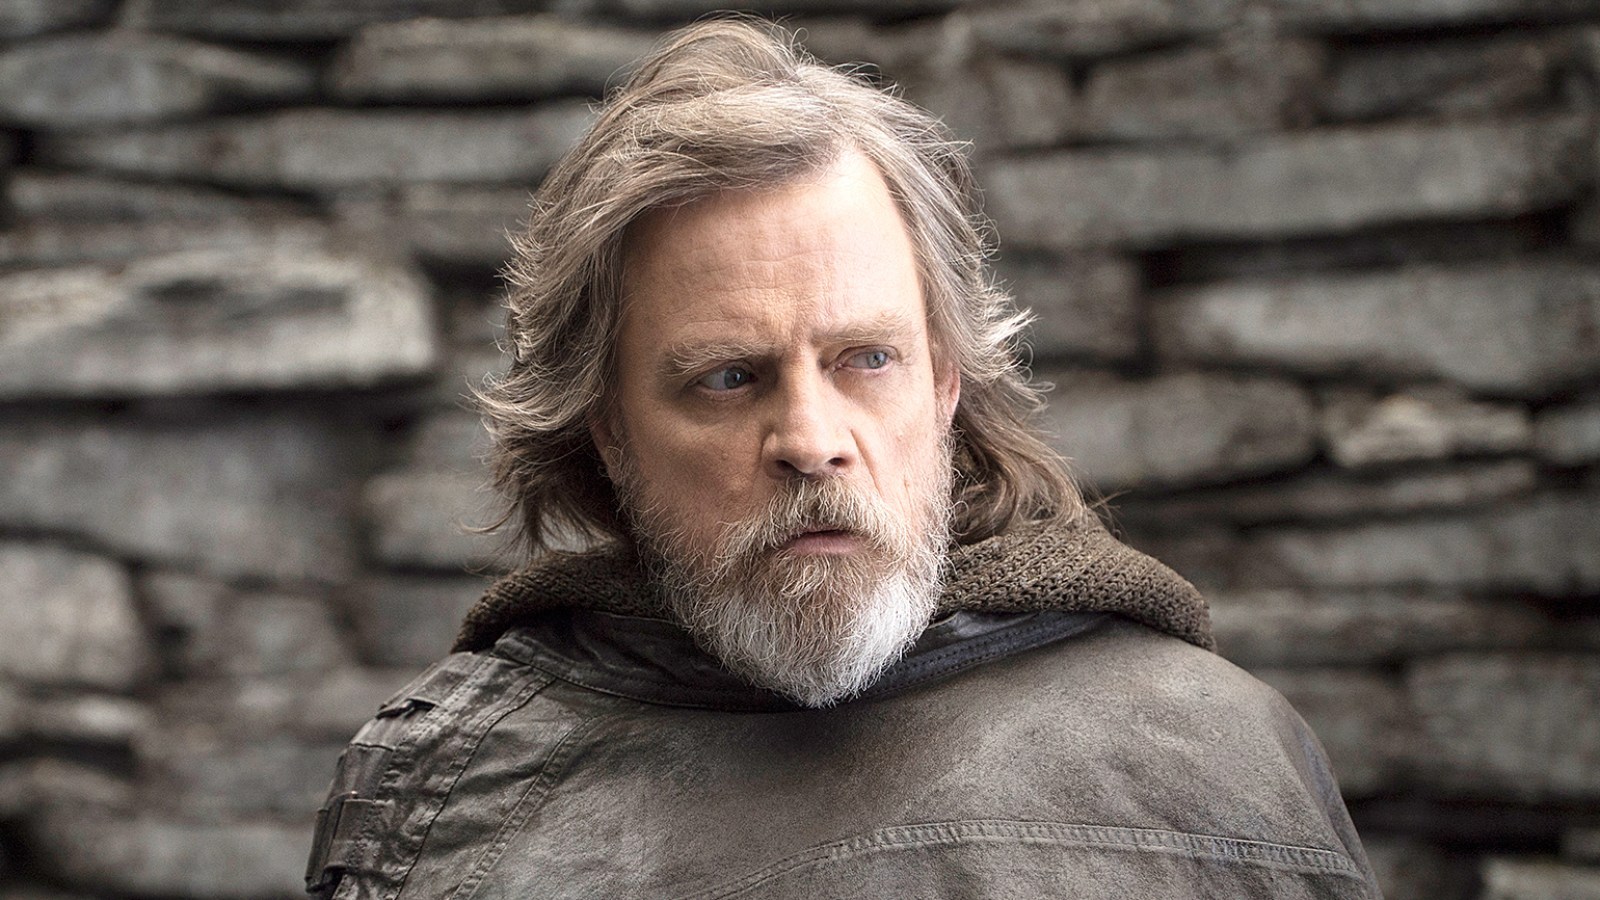 Who is Luke Skywalker, Part 2: “I Thought He Was a Myth”